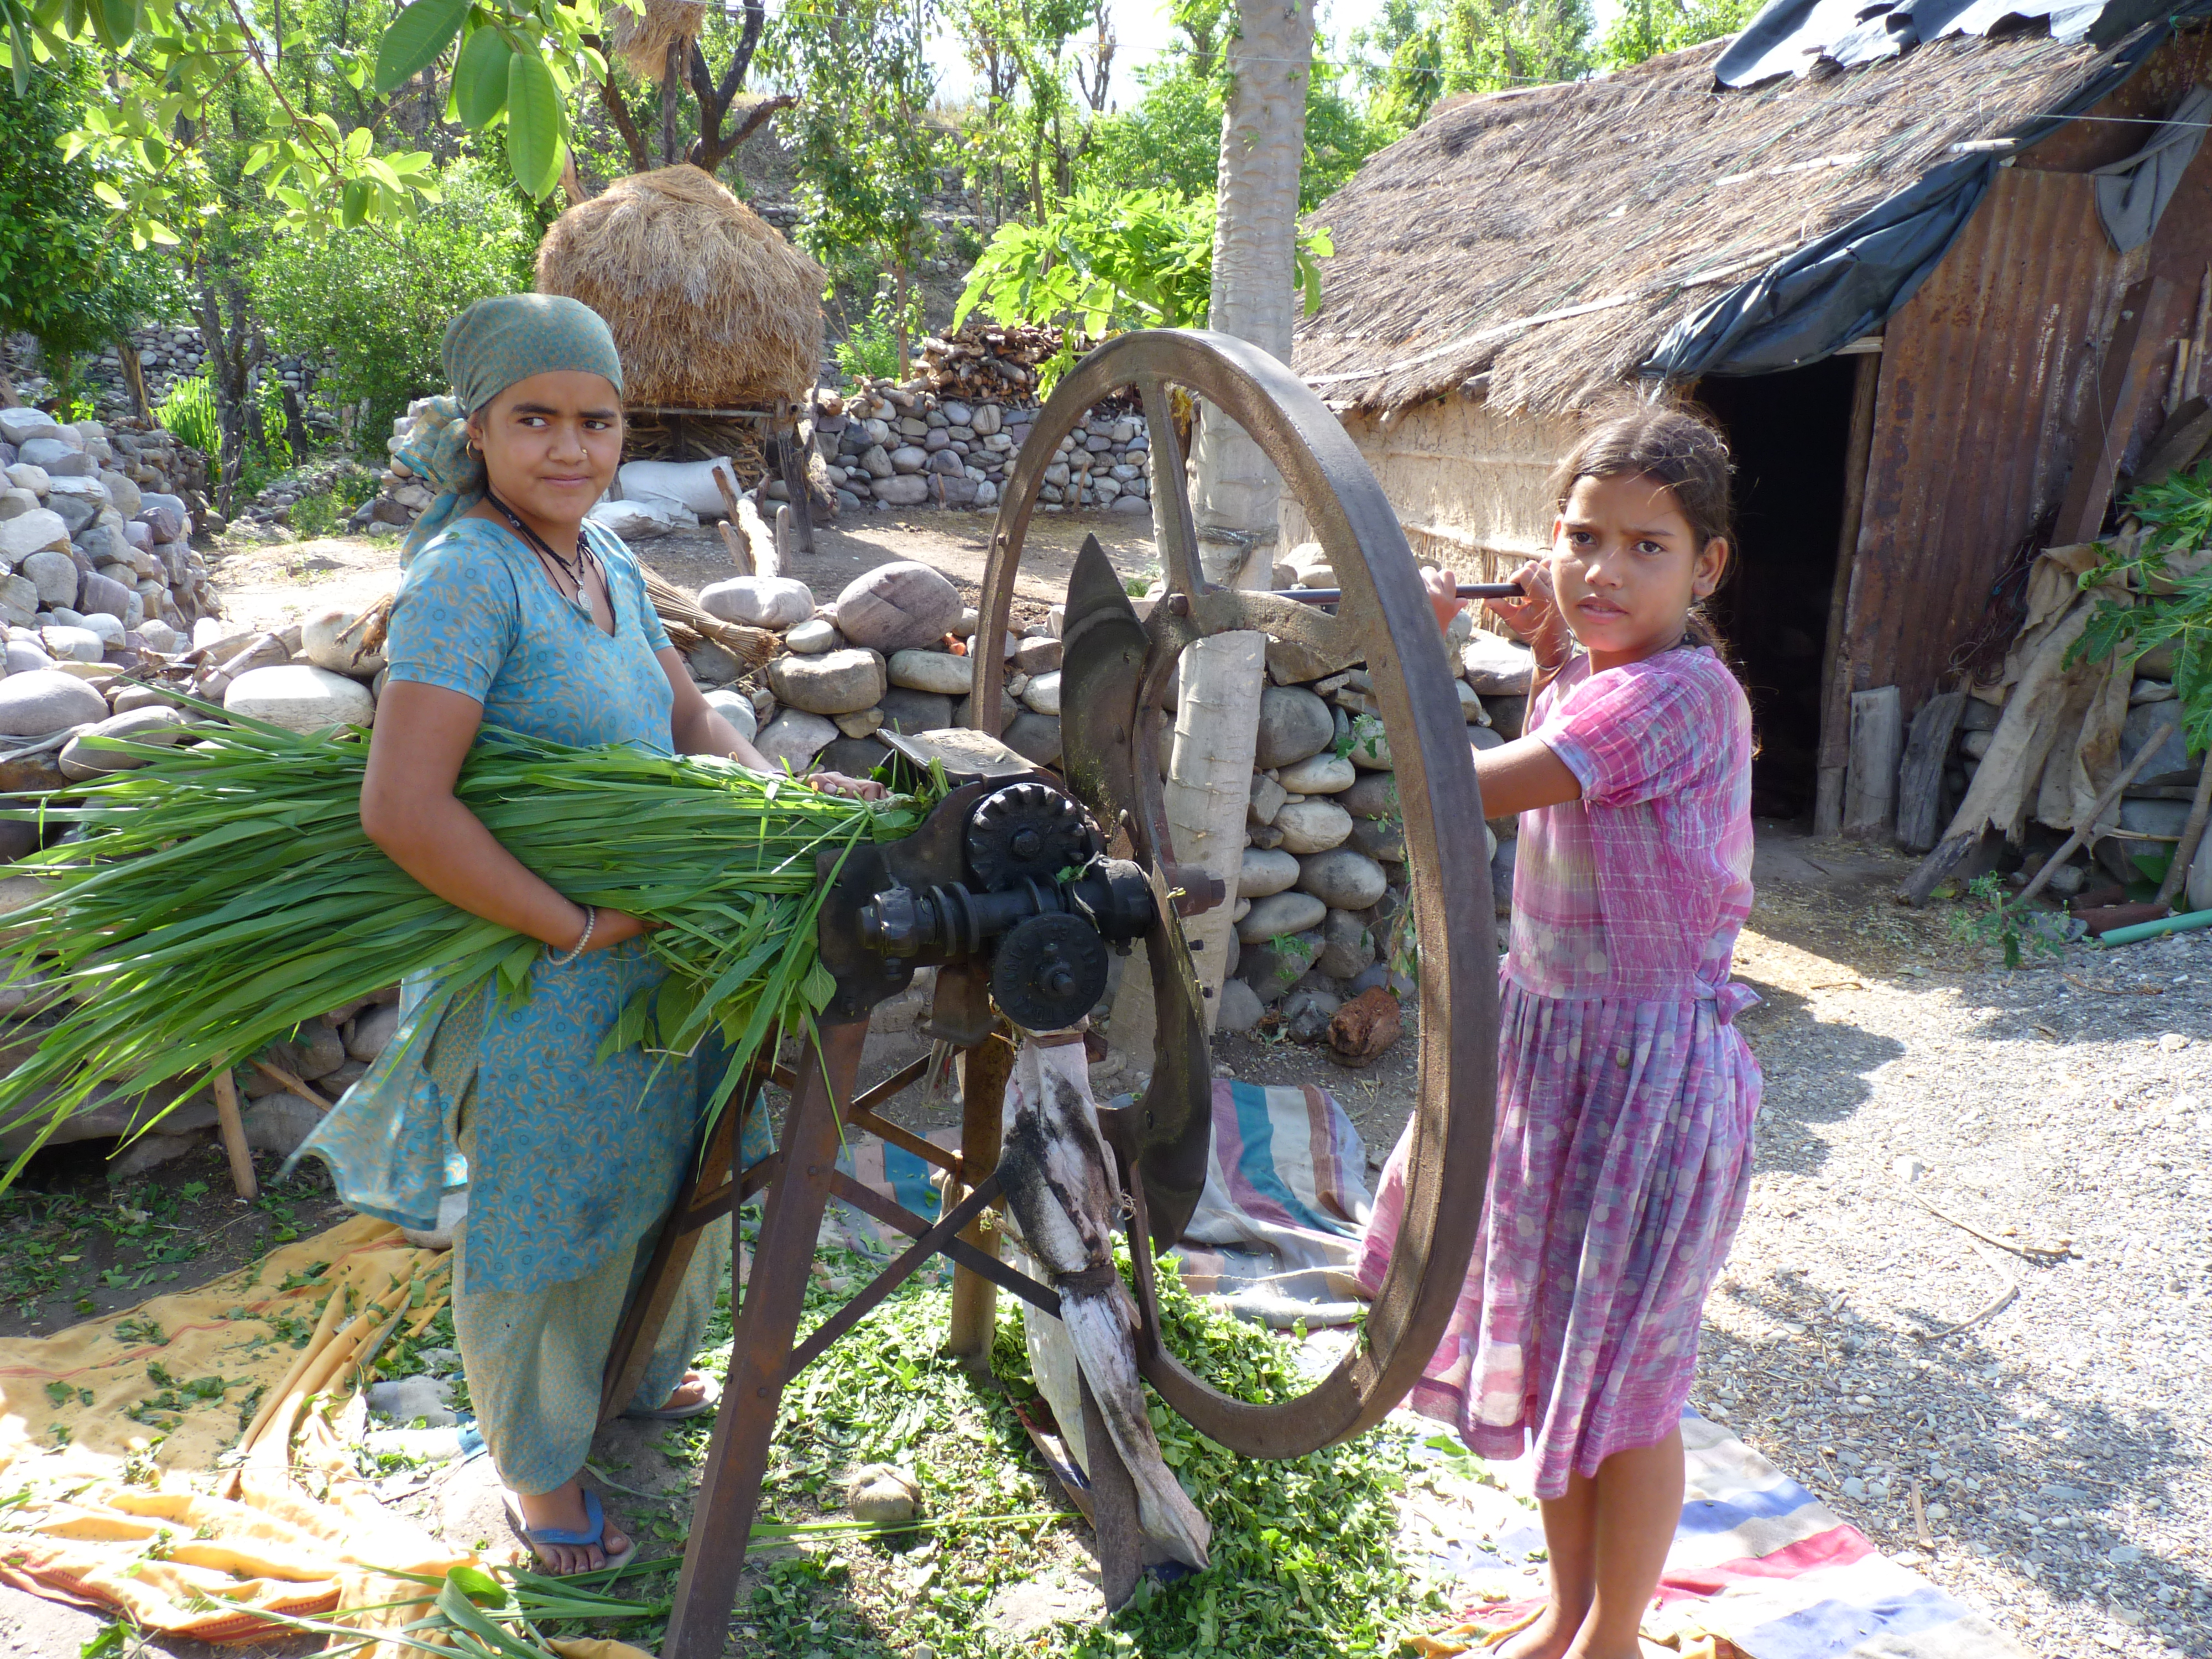 An older woman and young girls working with fronds.